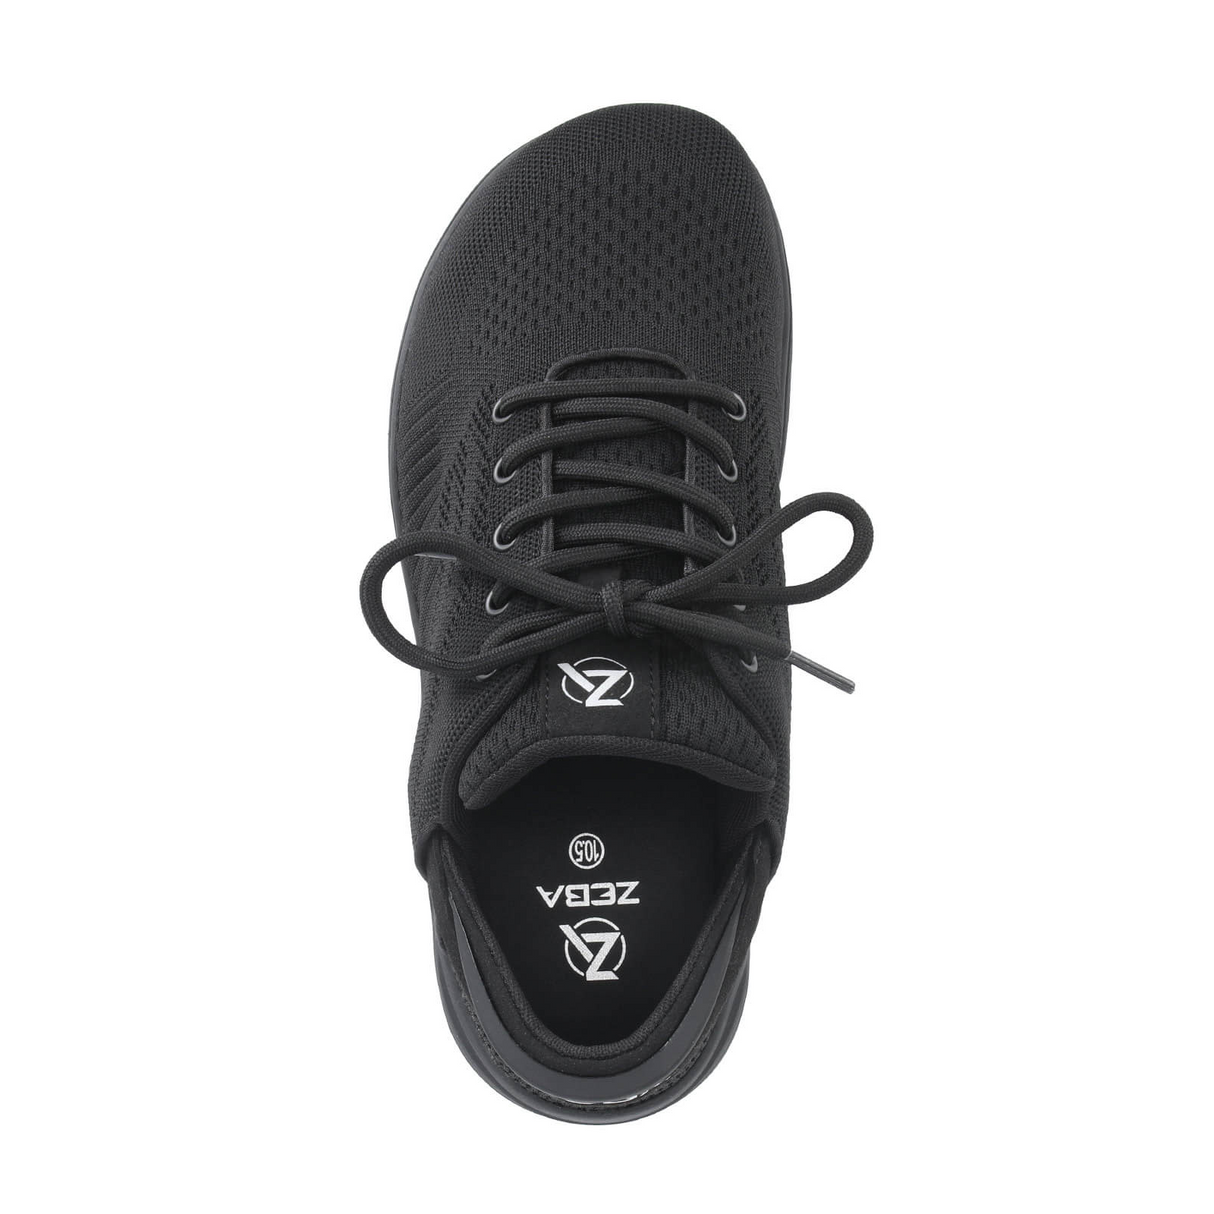 Zeba Husky (Men) - Black Athletic - Casual - Lace Up - The Heel Shoe Fitters